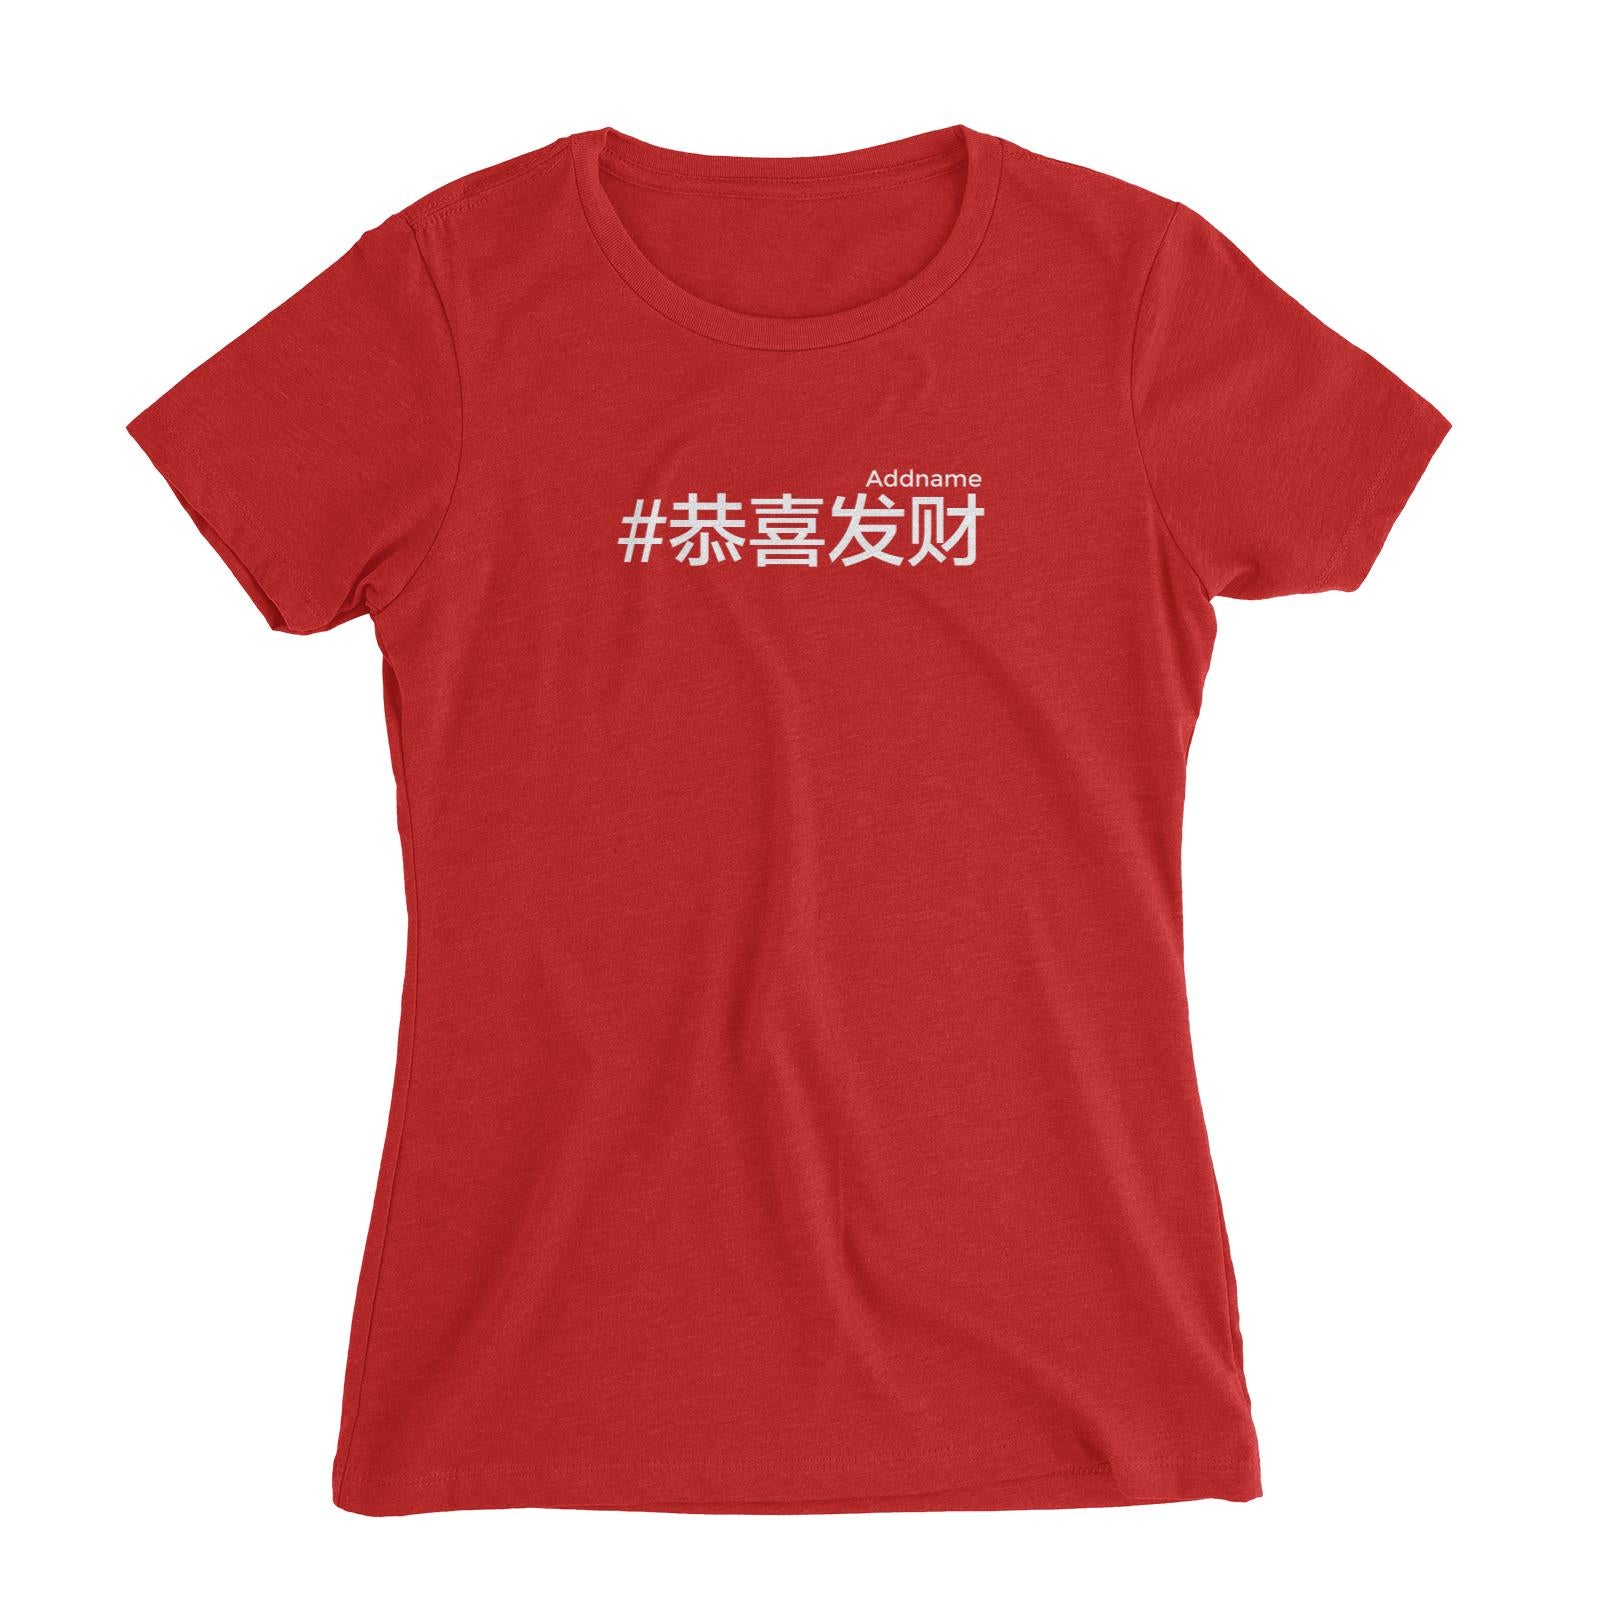 Chinese New Year Hashtag Gong Xi Fa Cai Chinese Women's Slim Fit T-Shirt  Personalizable Designs